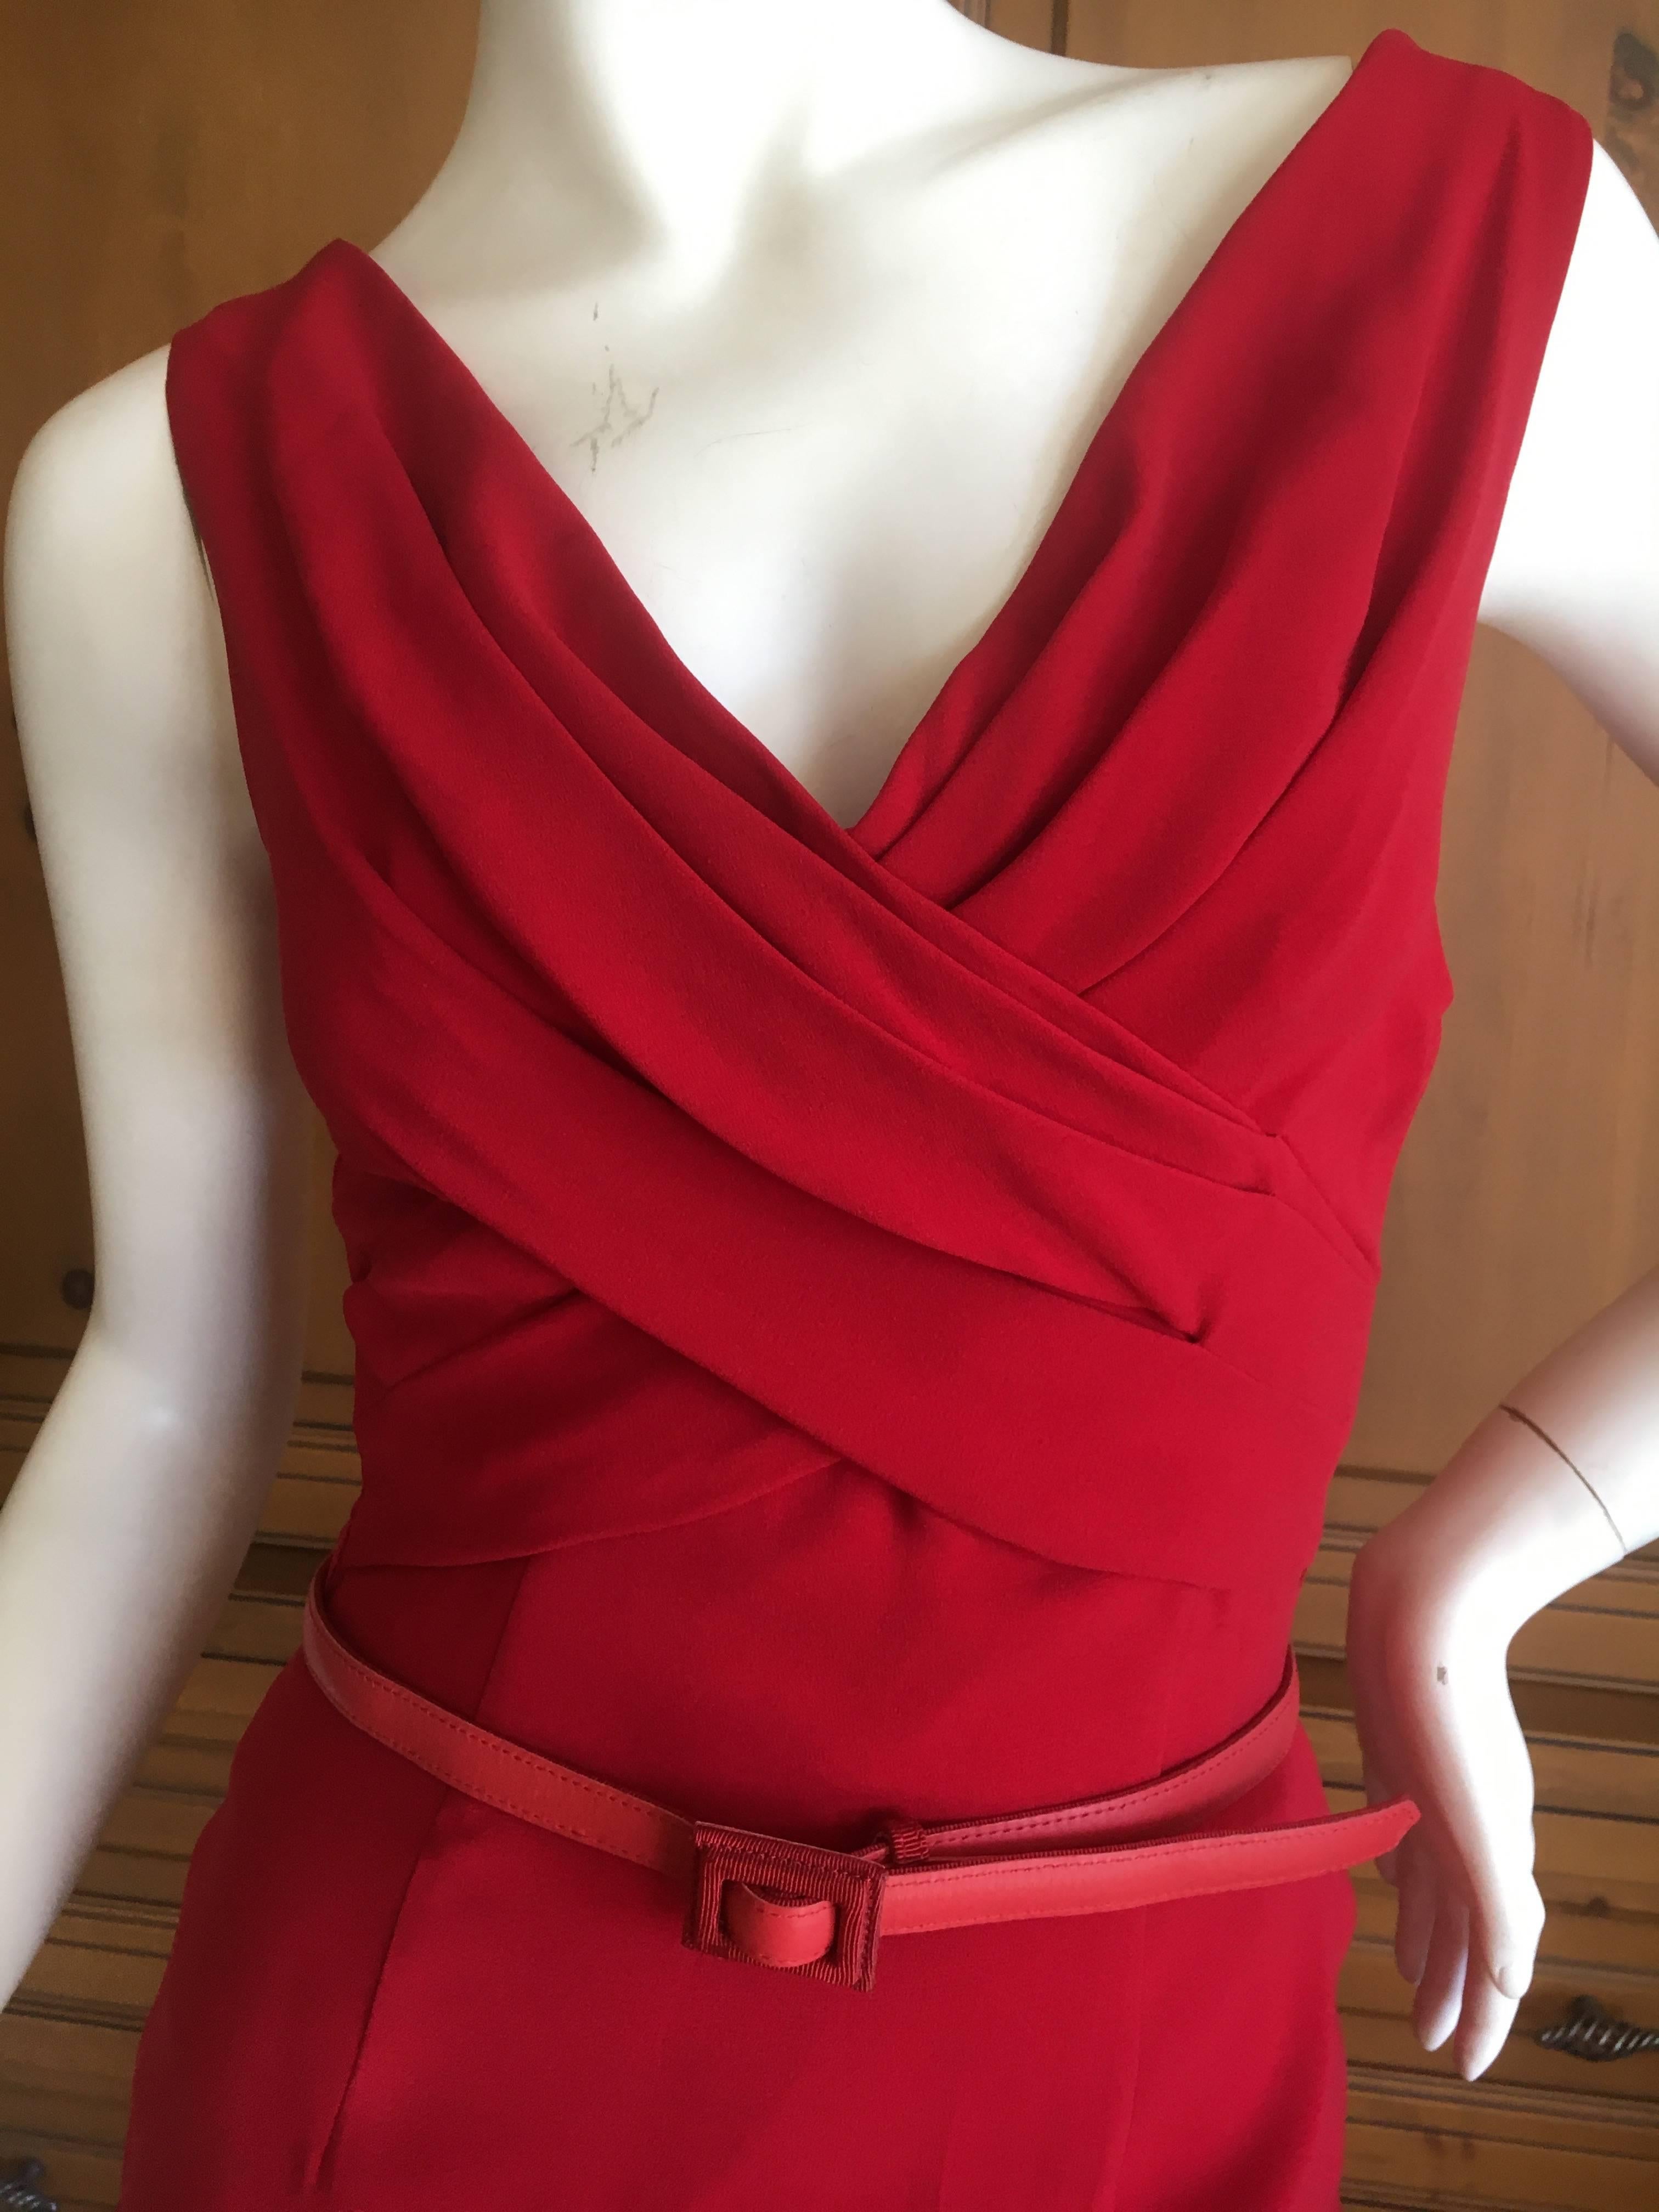 Christian Dior by John Galliano Red Belted Day Dress.
Lined in sik, with a detachable belt, so chic.
Size 38
Bust 36